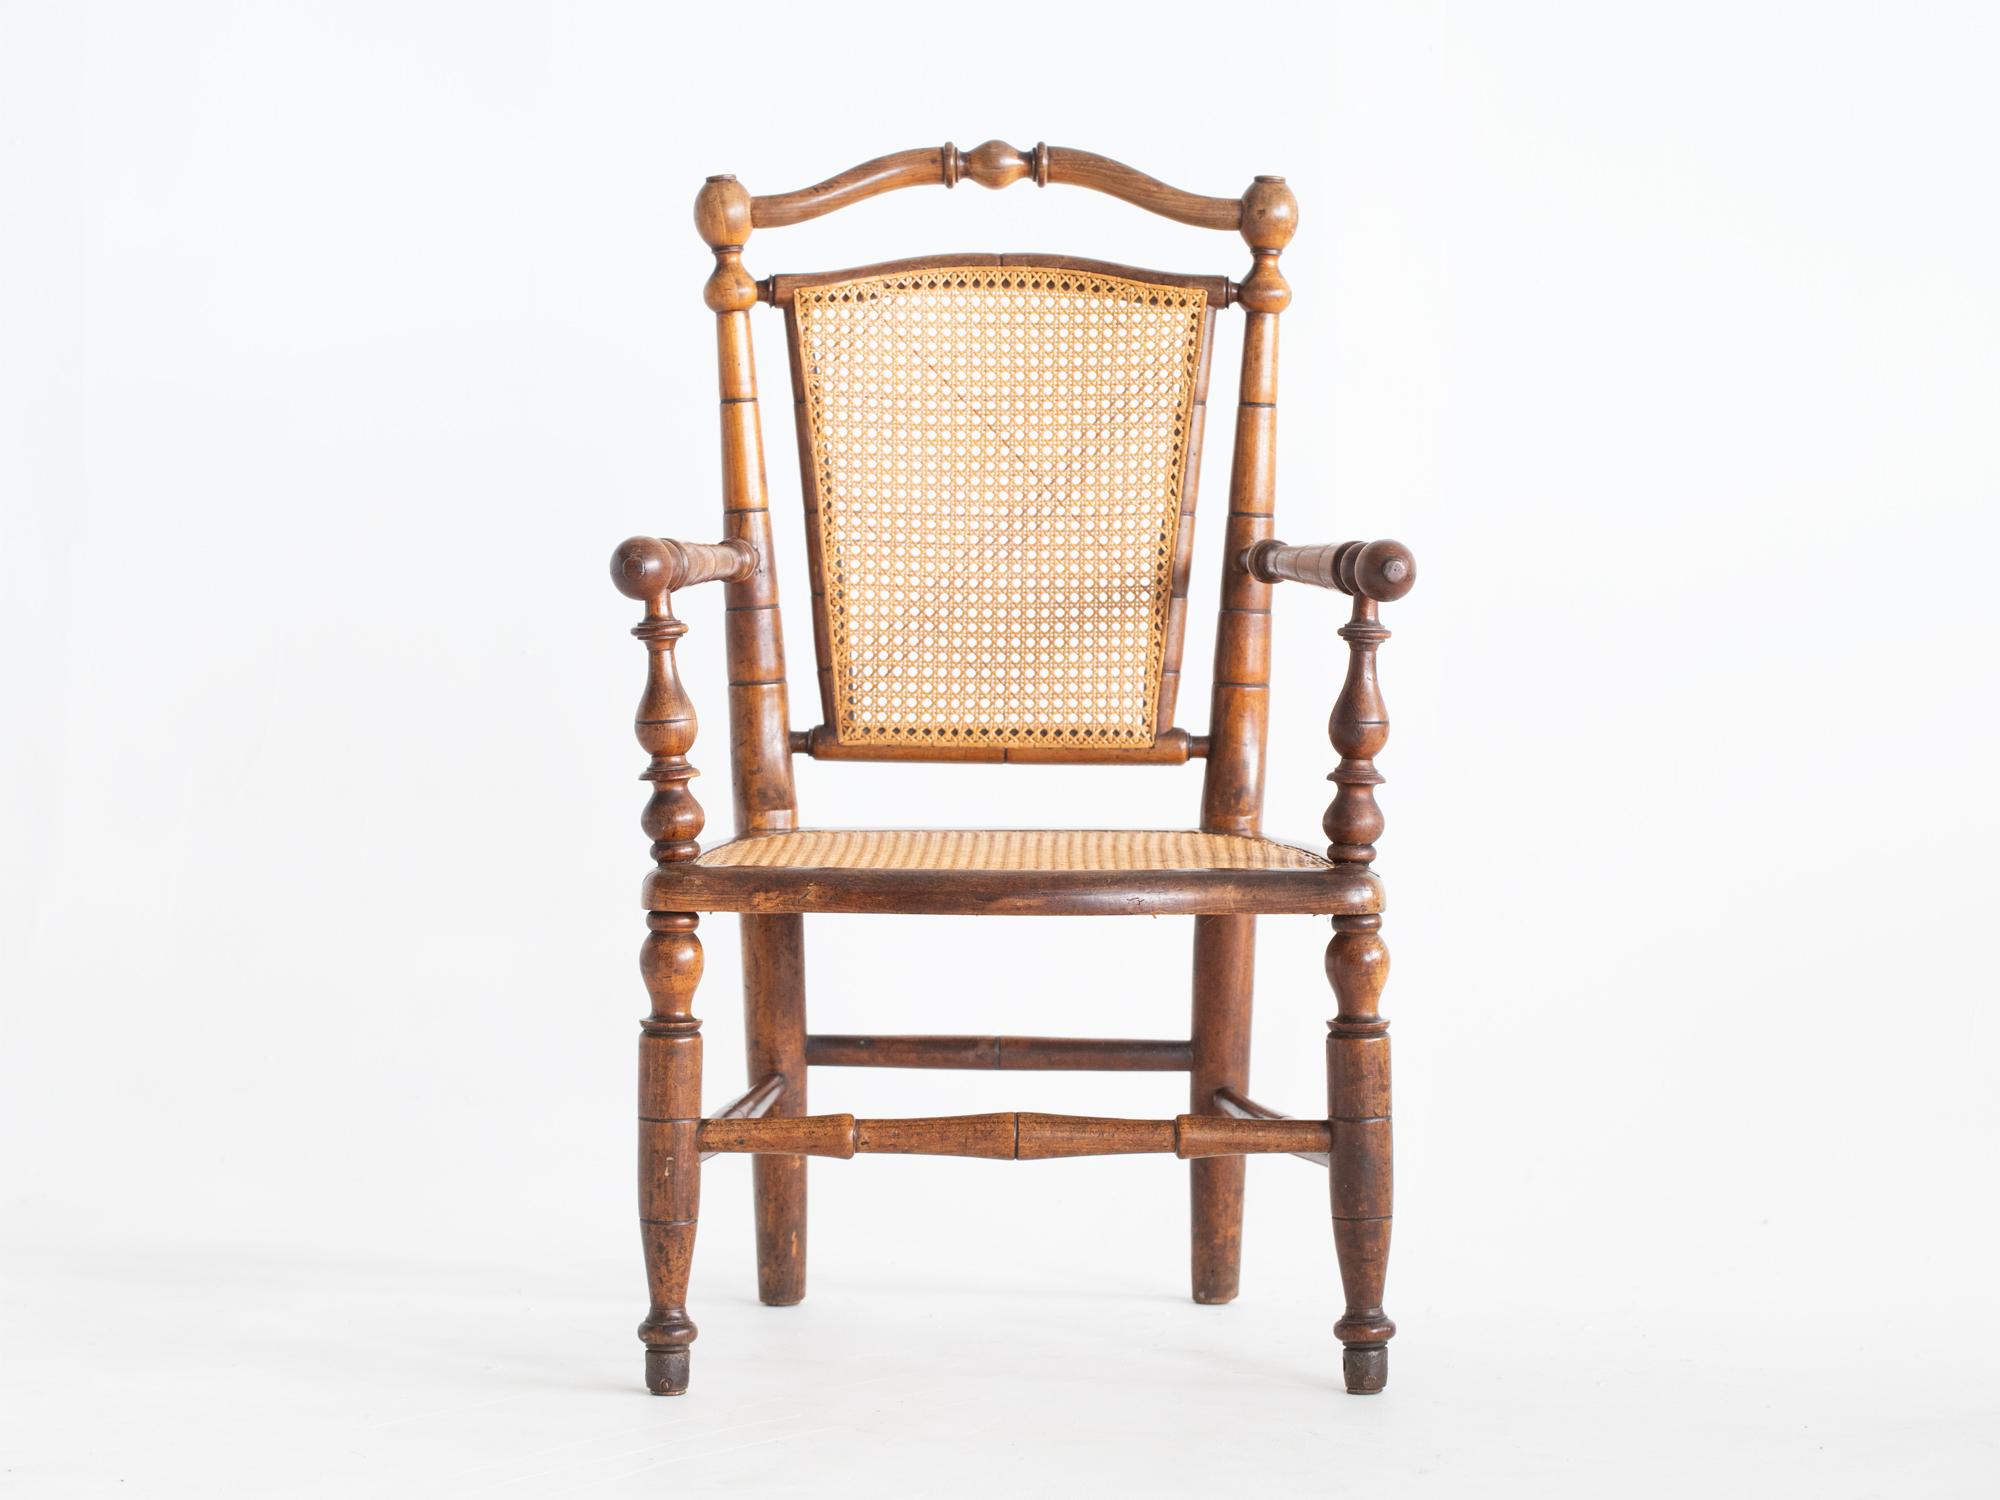 A caned faux bamboo armchair. French, late 19C.

Sturdy, patinated frame with all cane work strong and serviceable as is.

95 x 60 x 56.5 cm (37.4 x 23.6 x 22.2 